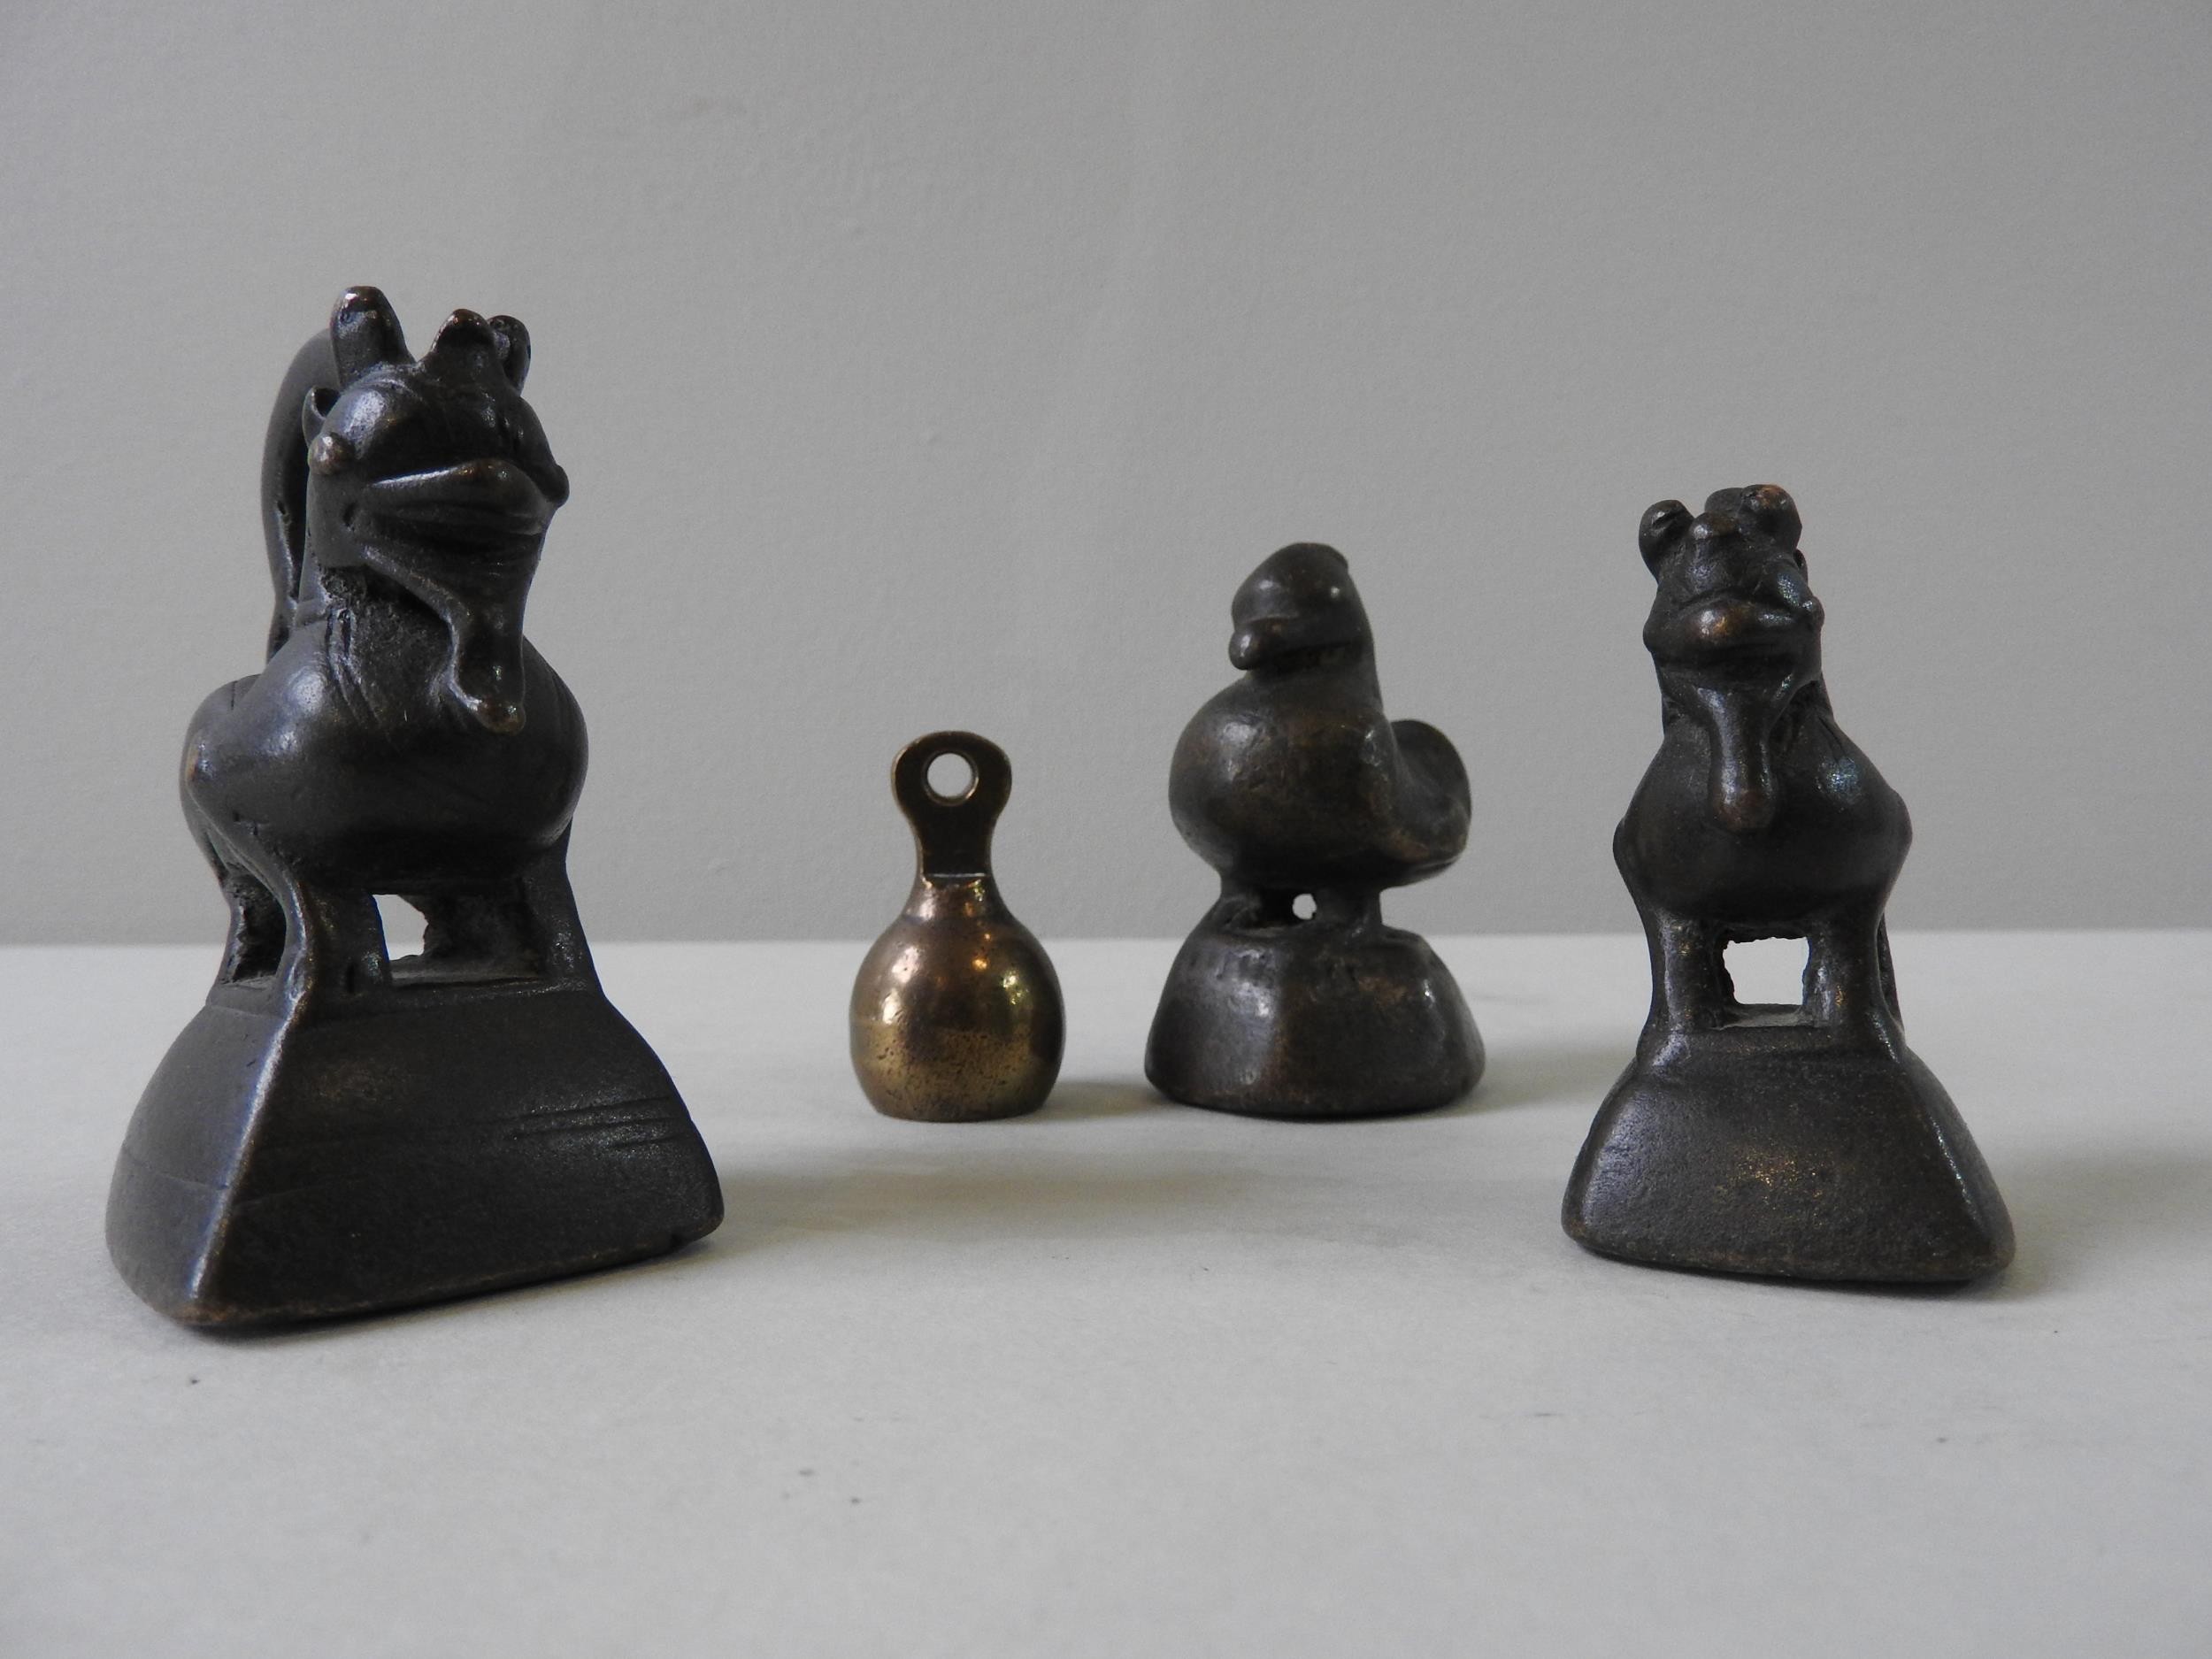 THREE ASHANTI BRONZE OPIUM OR GOLD WEIGHTS in the form of a duck and two stylised creatures, 7cm max - Image 3 of 6